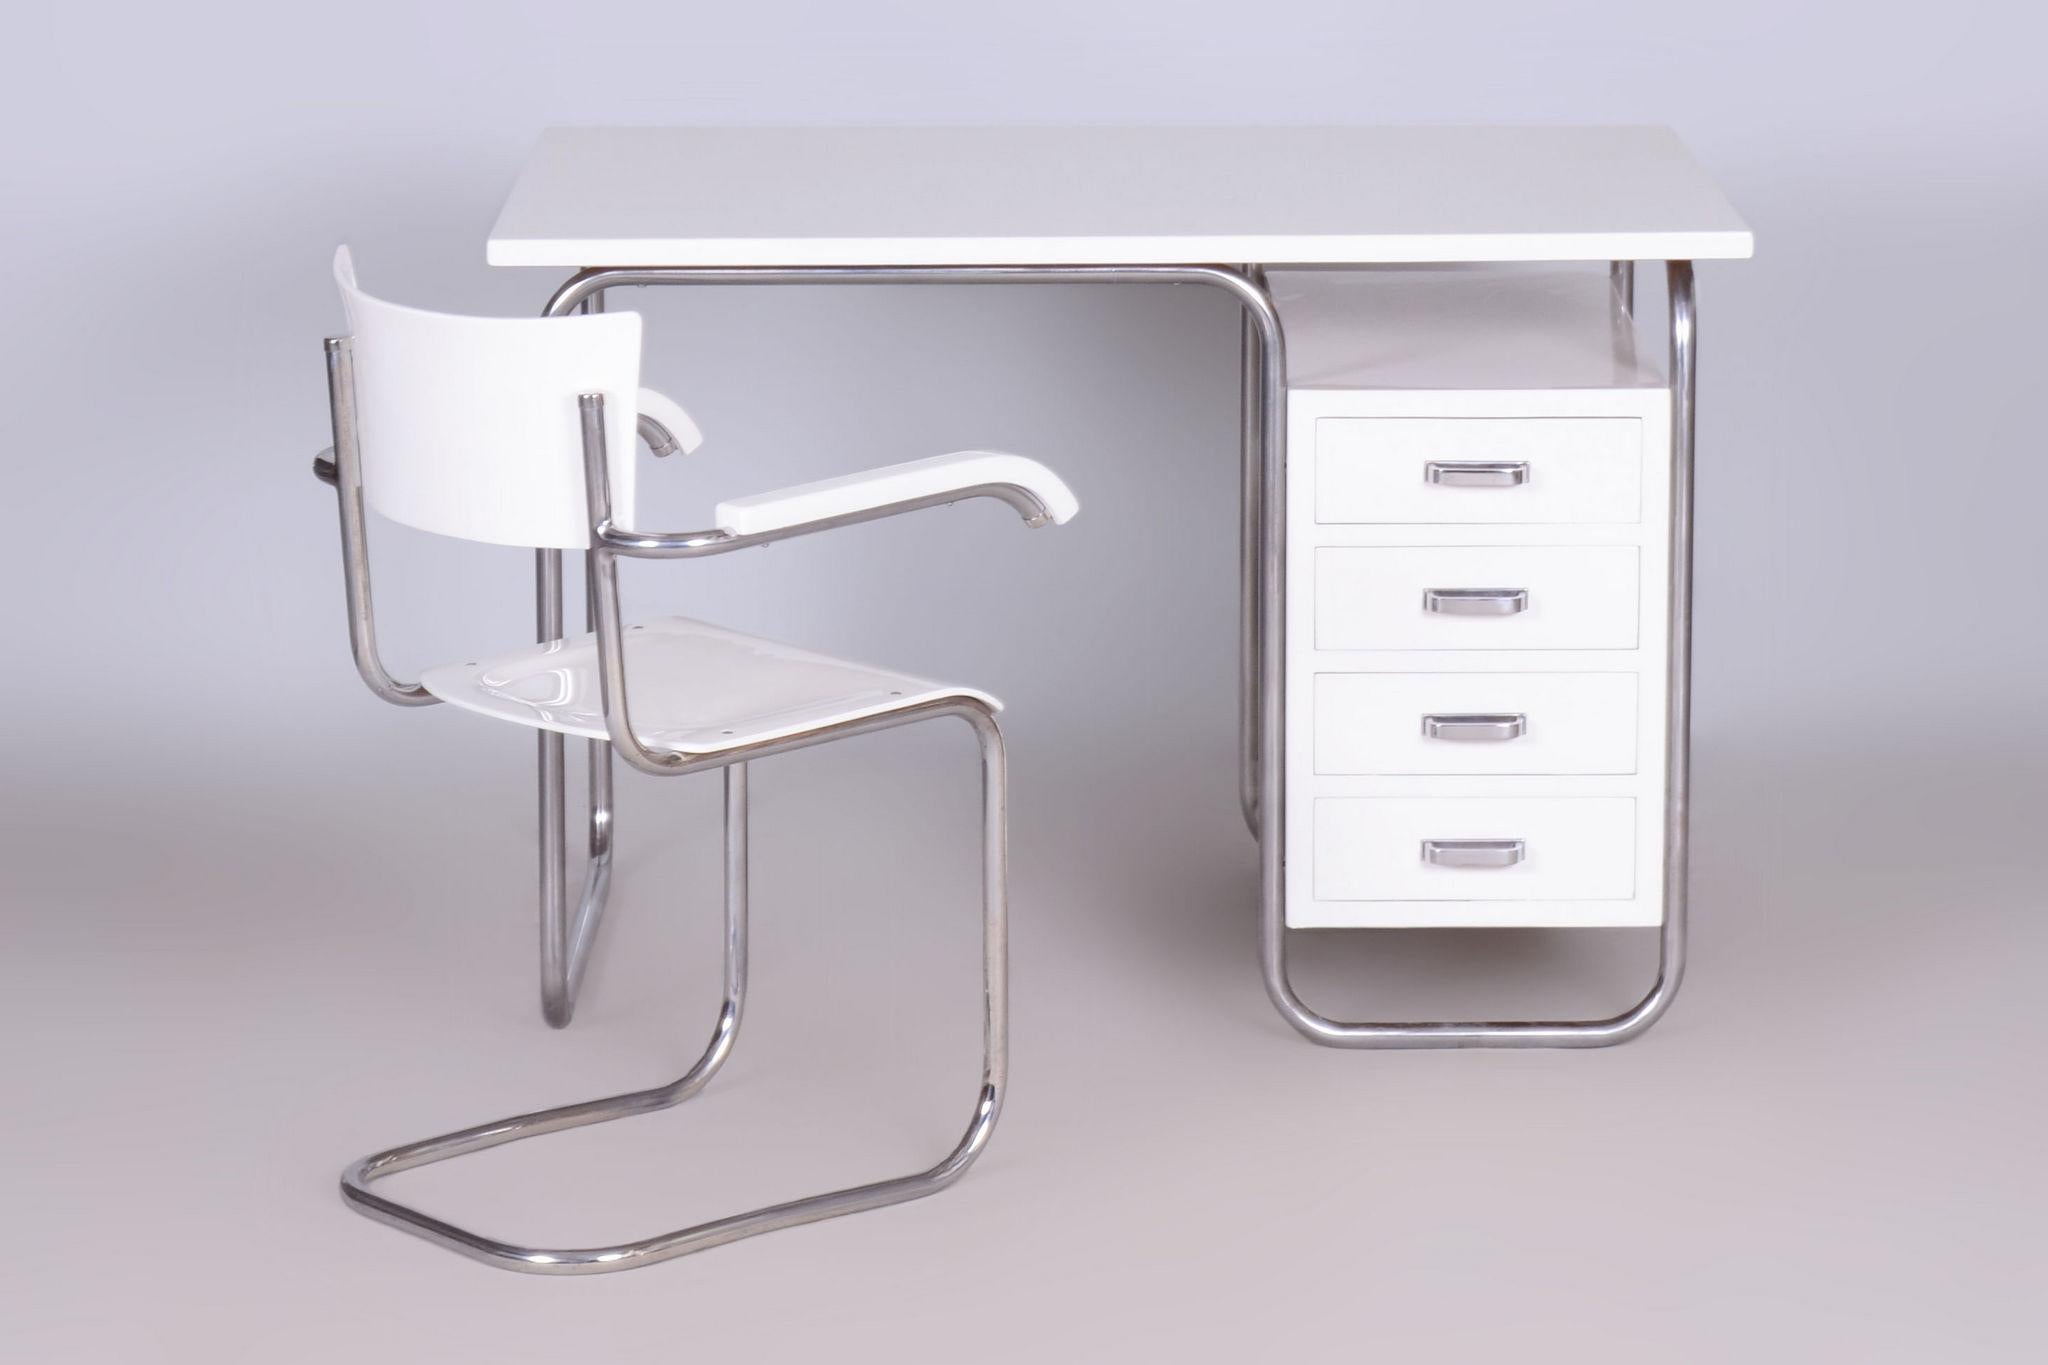 Restored Bauhaus Writing Desk With Chair, Chrome, Steel, Wood, Czech, 1930s In Good Condition For Sale In Horomerice, CZ